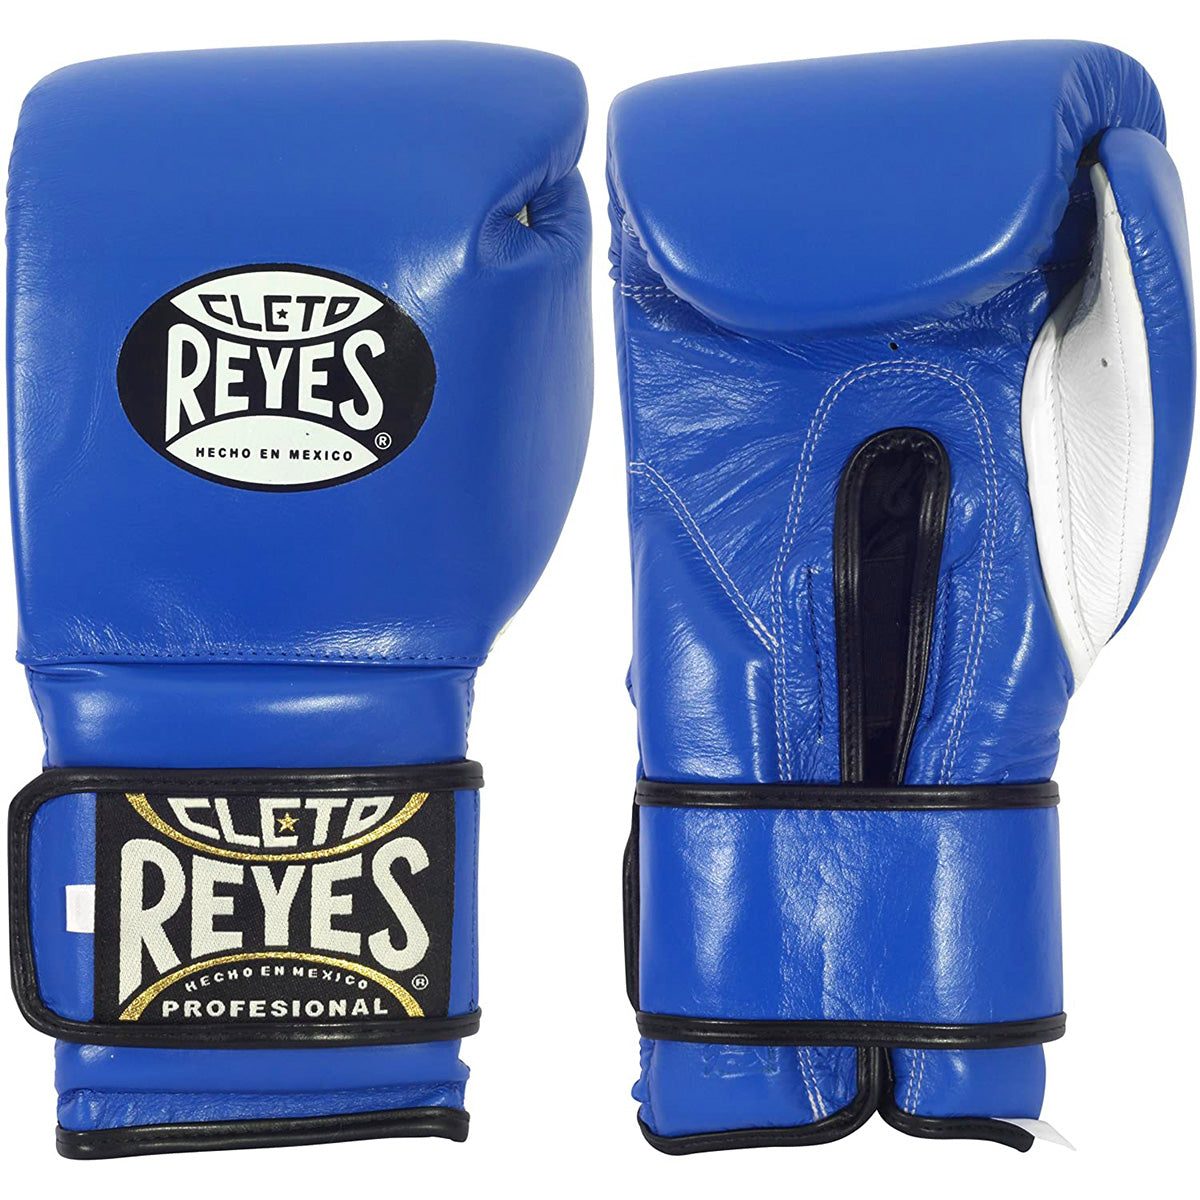 Cleto Reyes Hook and Loop Leather Training Boxing Gloves - Blue Cleto Reyes